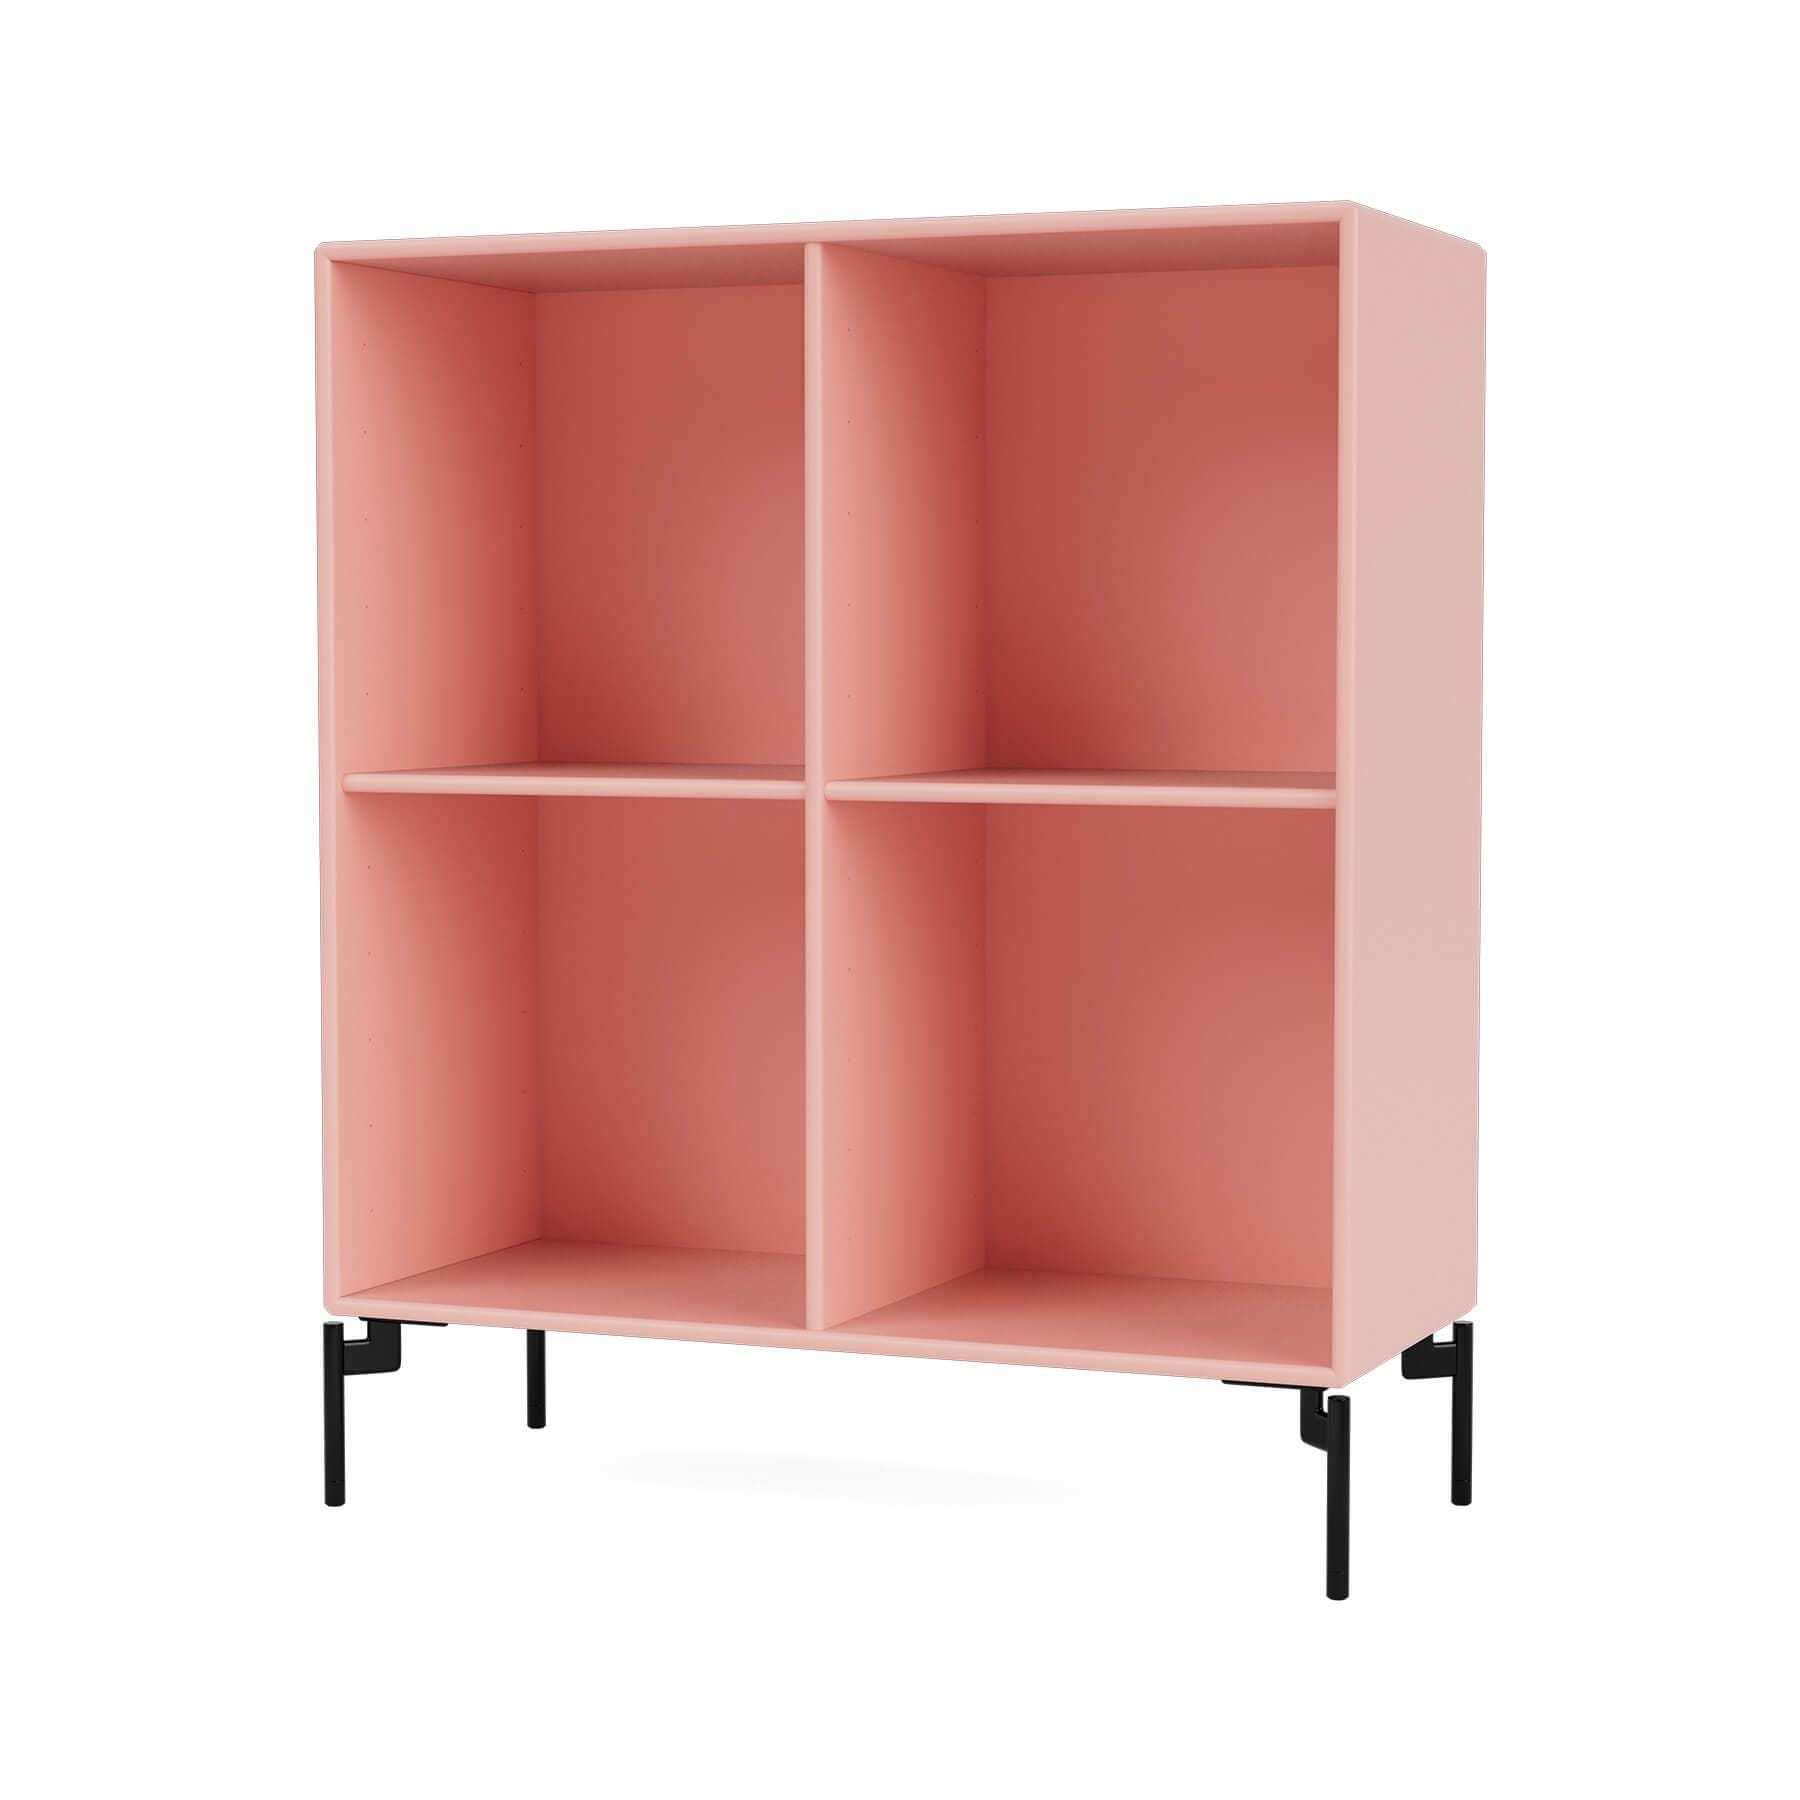 Montana Show Bookcase Ruby Black Legs Pink Designer Furniture From Holloways Of Ludlow